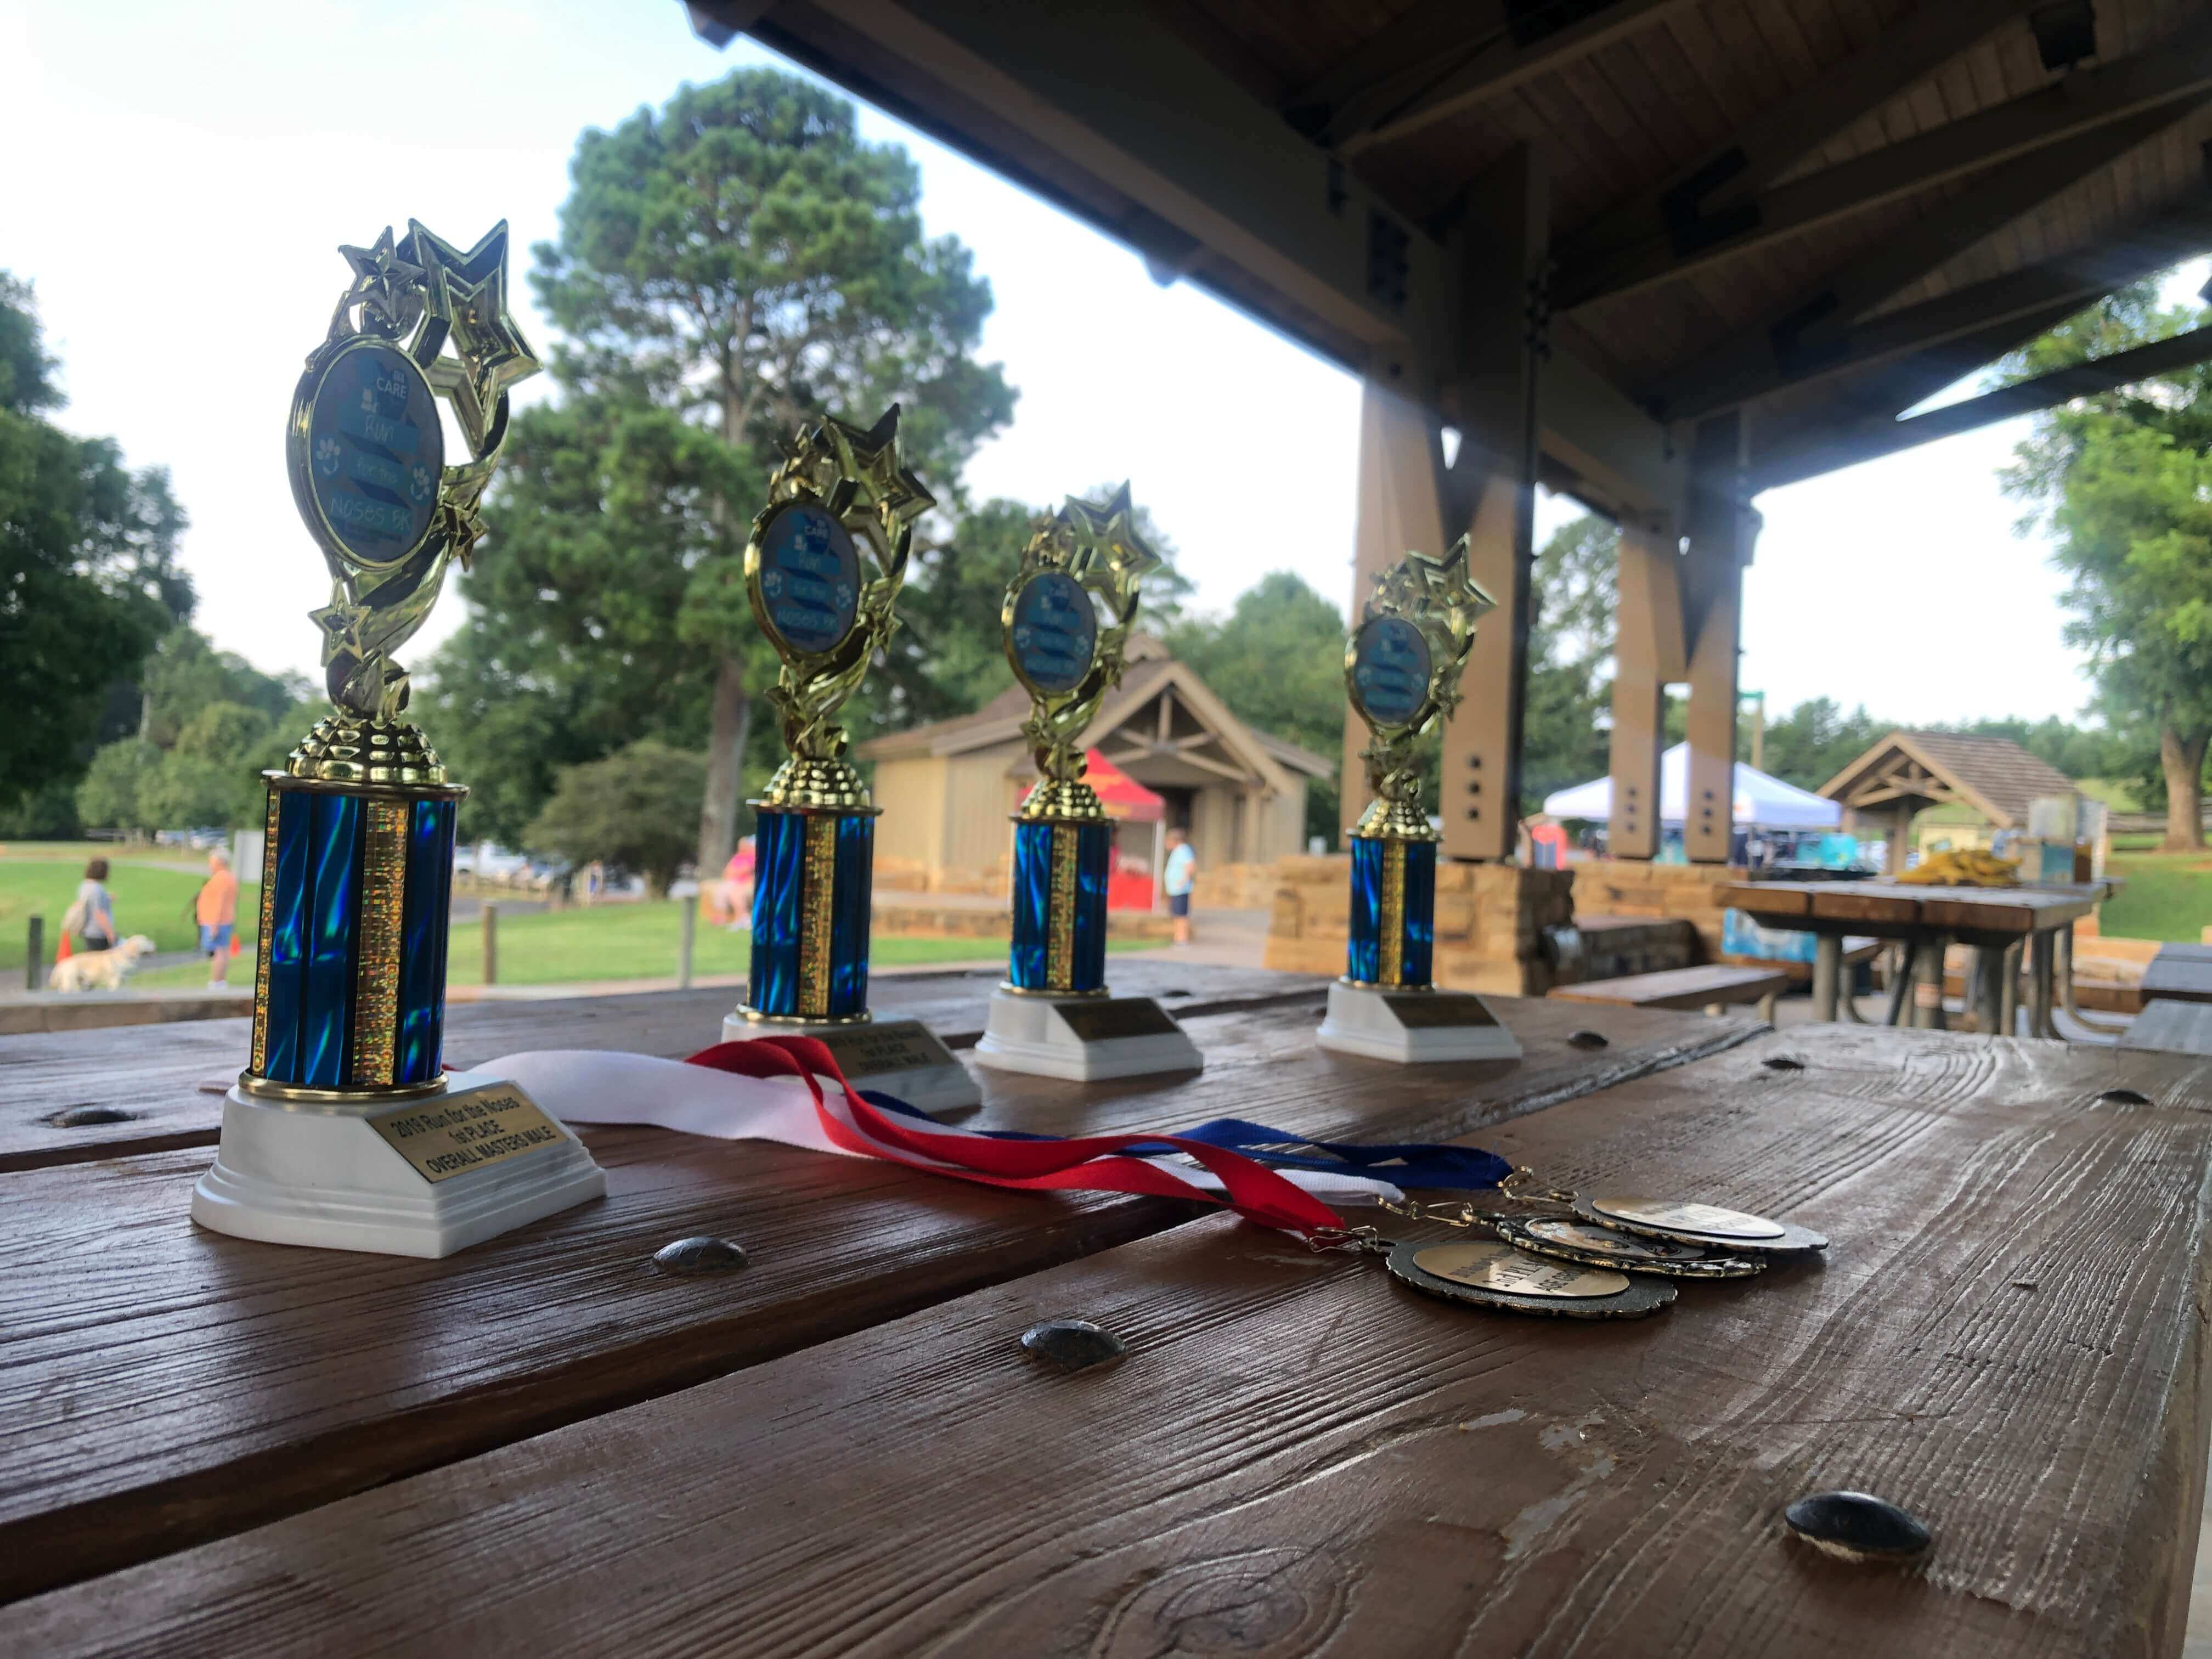 2019 GVA CARE Fund Run for the Noses 5k: Awards